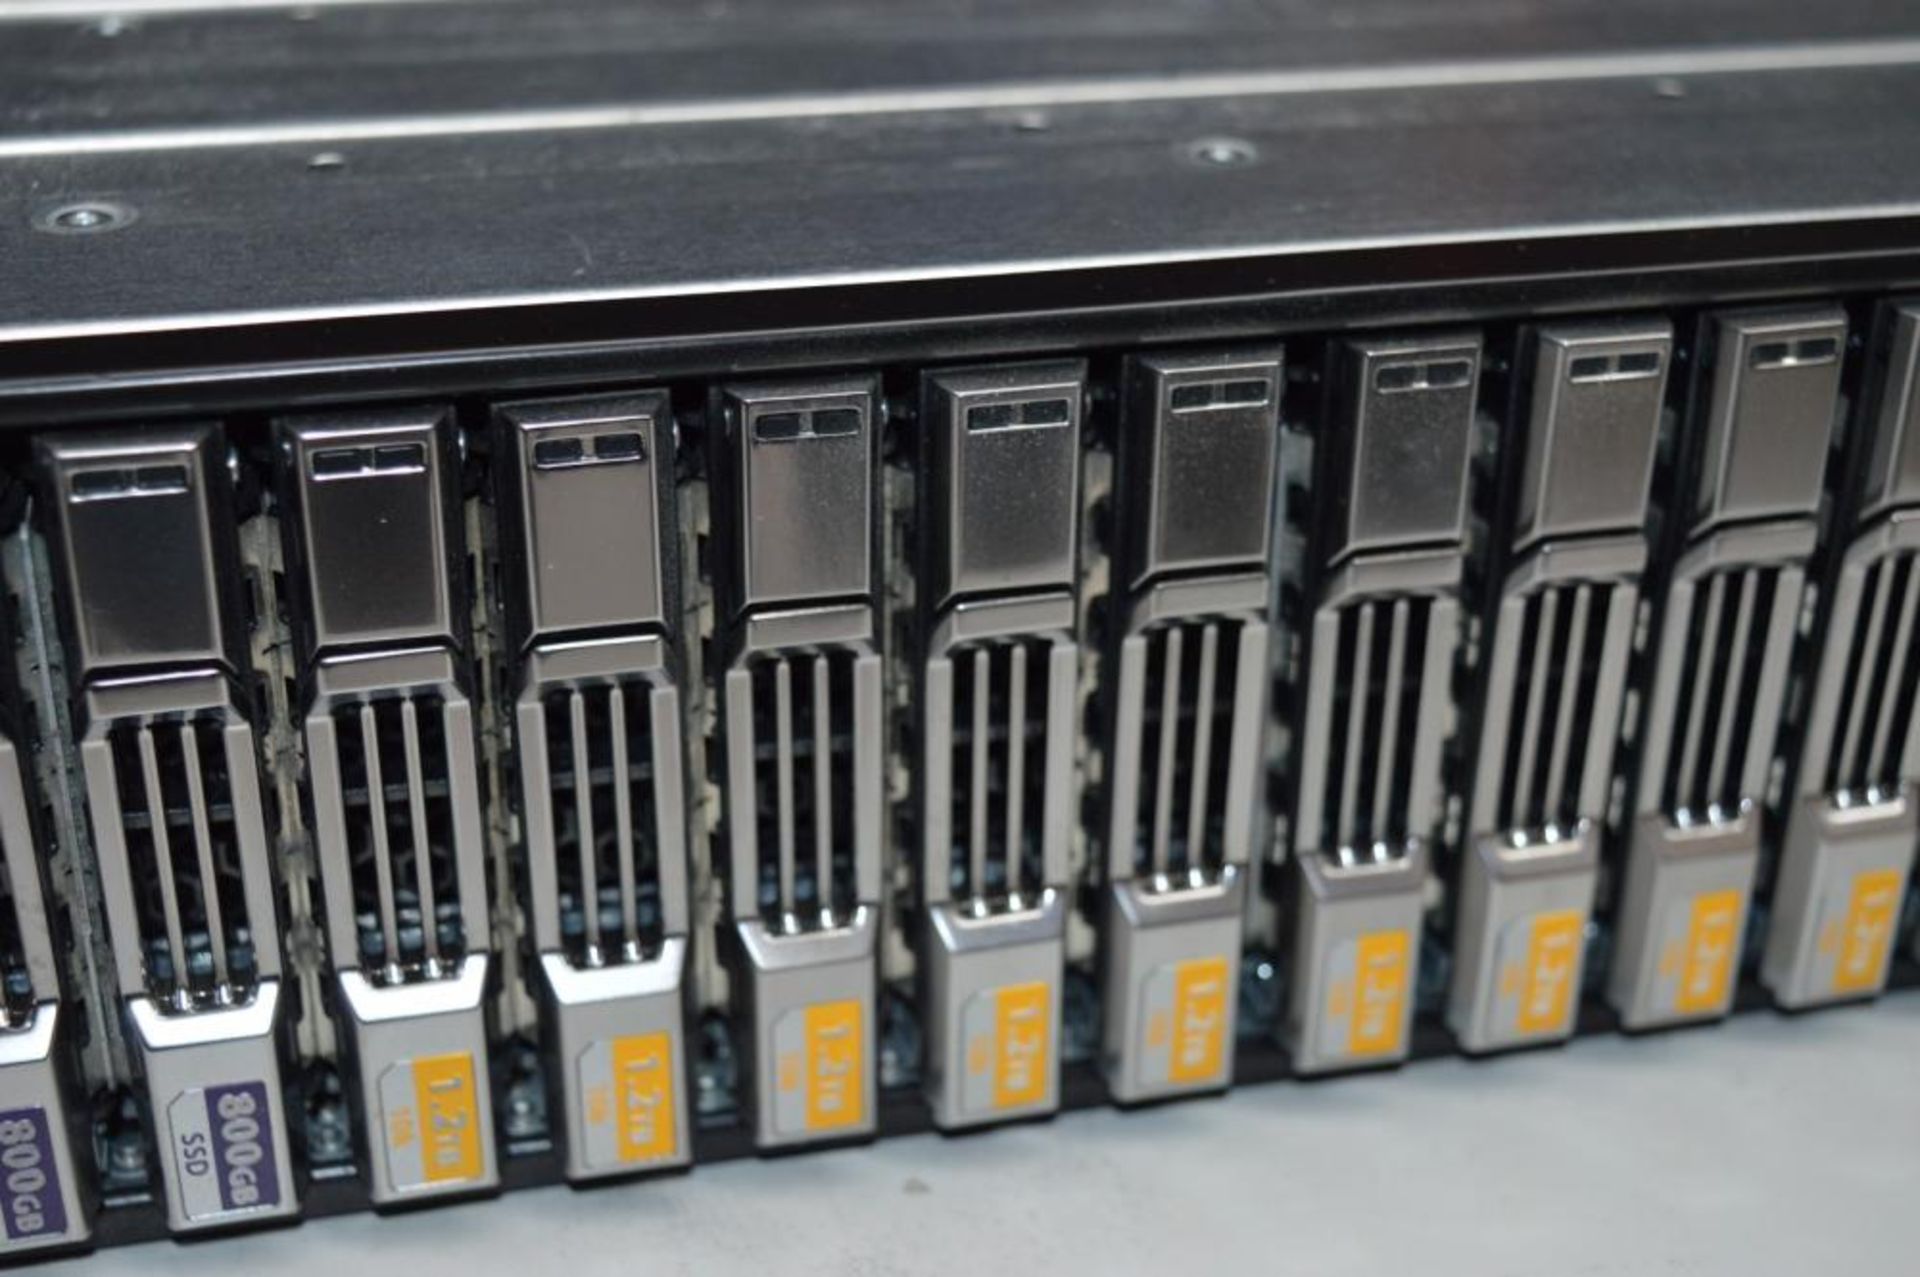 1 x Dell EqualLogic PS6210 Sans Storage Array With Dual 700w PSU's and 2 x EqualLogic 15 Modules - Image 7 of 7